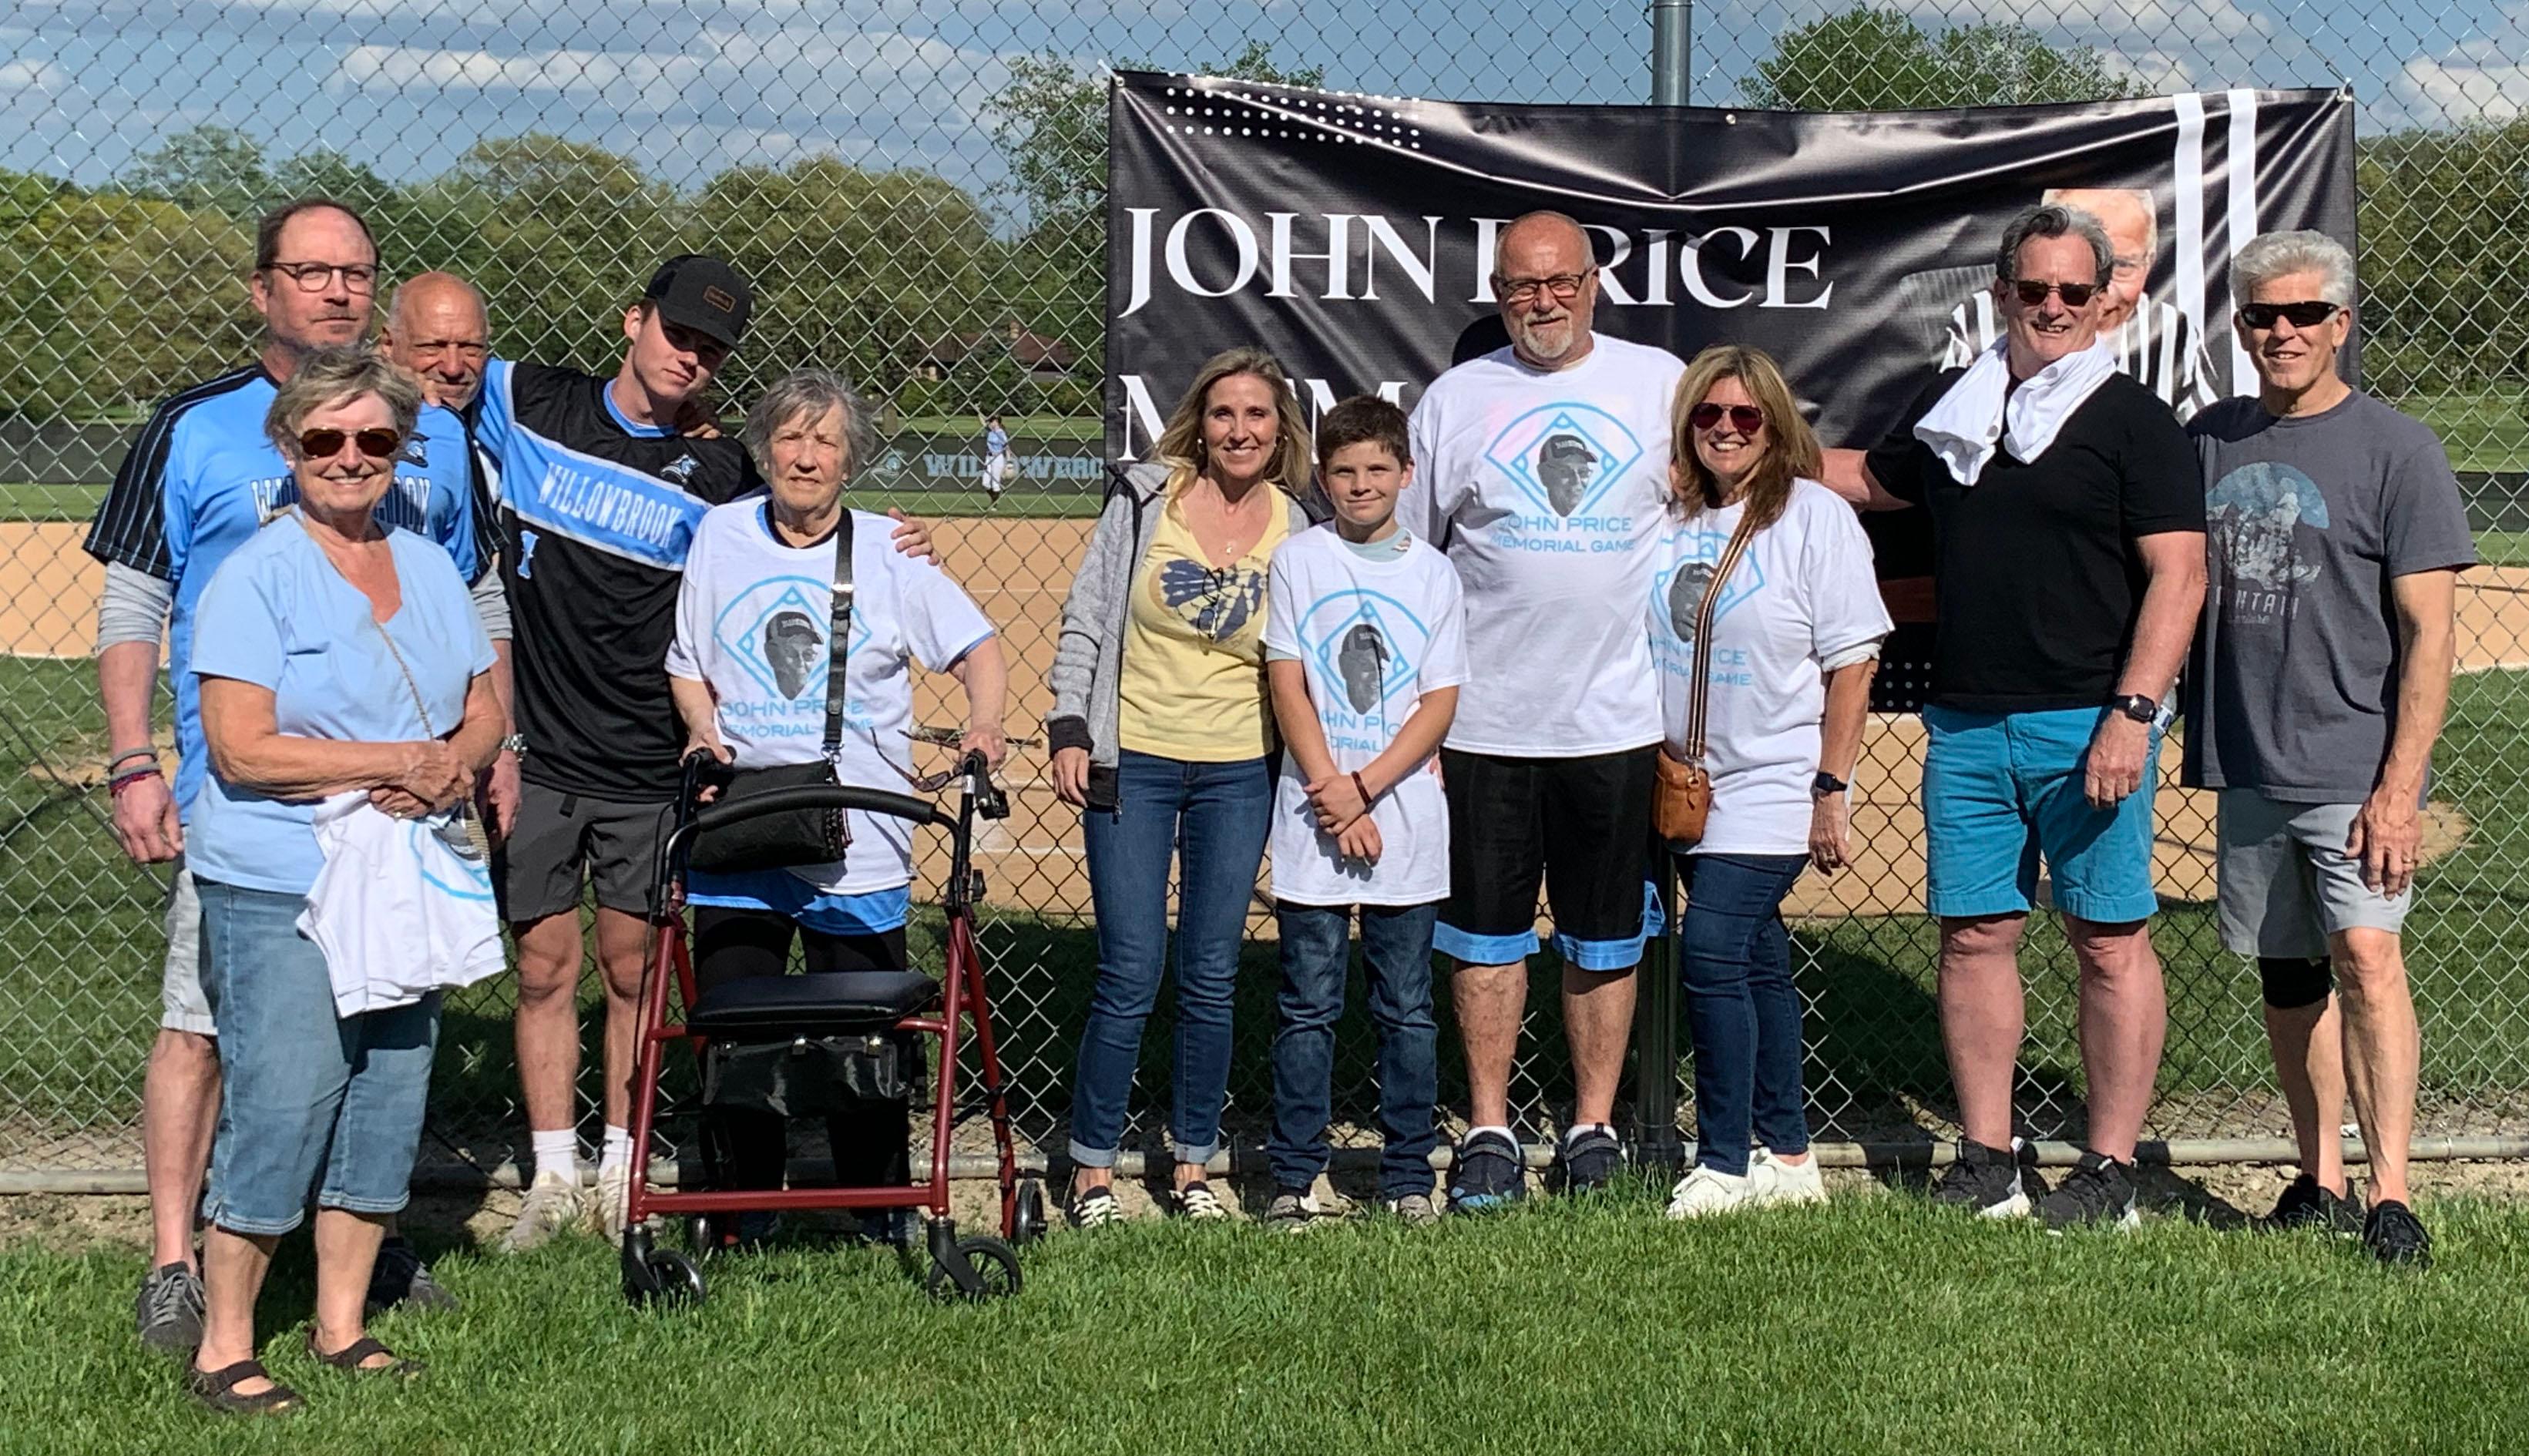 Willowbrook hosts memorial events to honor and remember volunteer John Price